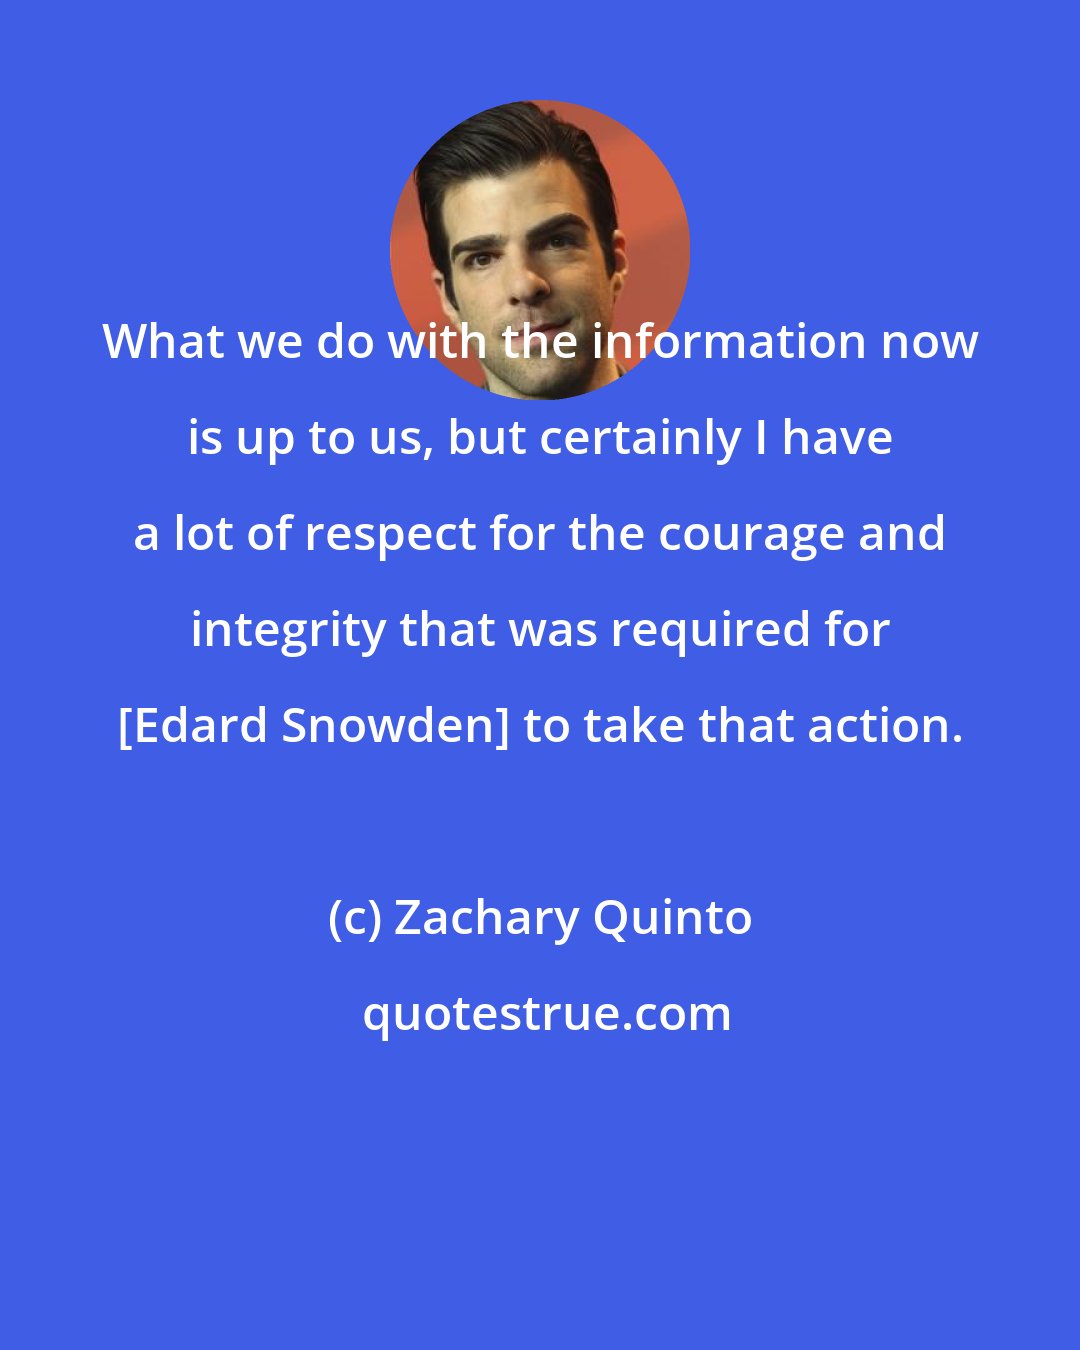 Zachary Quinto: What we do with the information now is up to us, but certainly I have a lot of respect for the courage and integrity that was required for [Edard Snowden] to take that action.